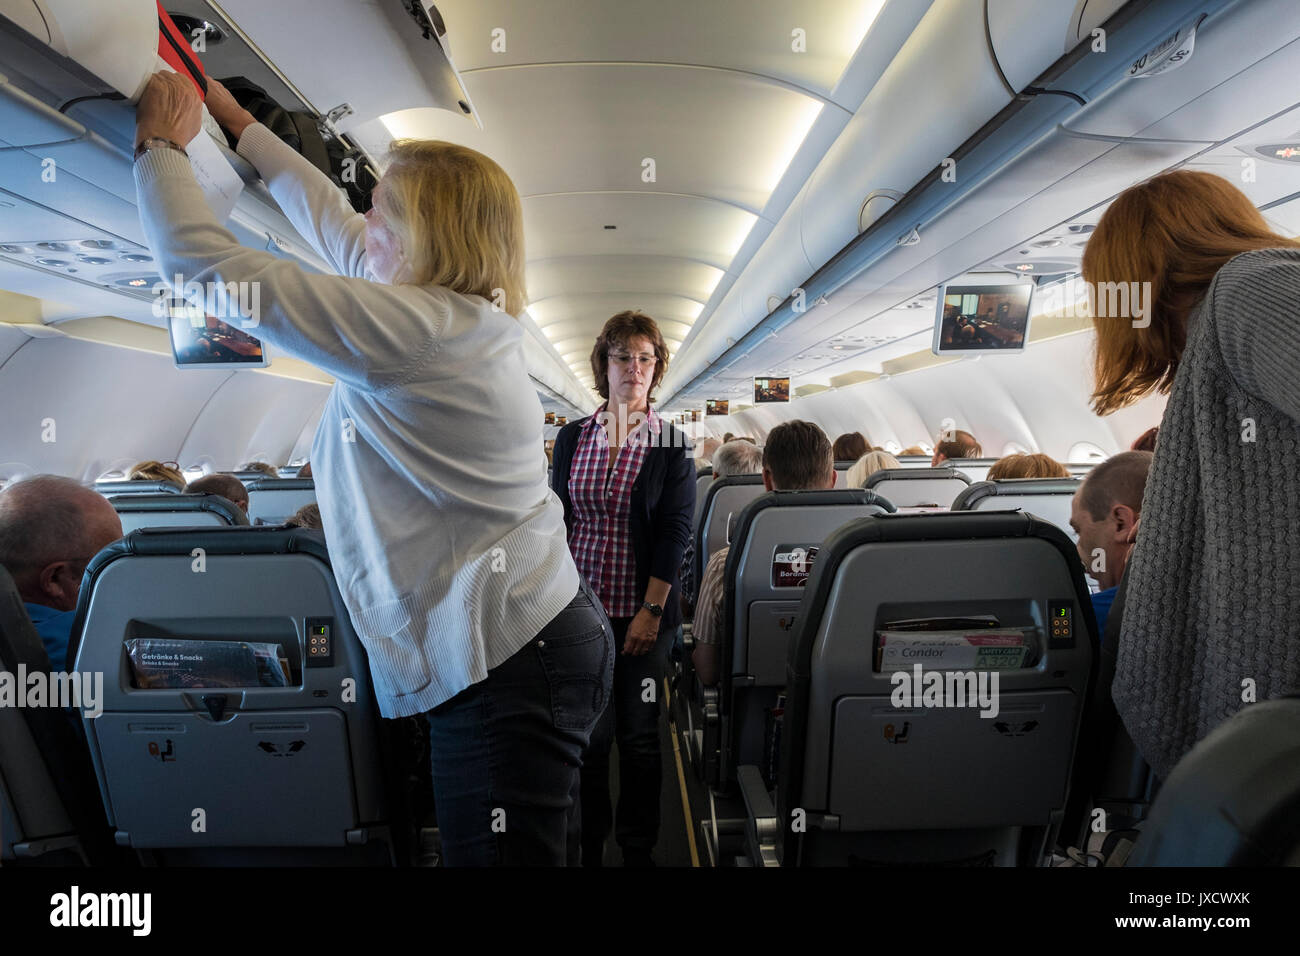 Passenger moving up and down the aisle during a flight on a Condor, Thomas Cook airlines, flight, Airbus A320, airplane, Stock Photo